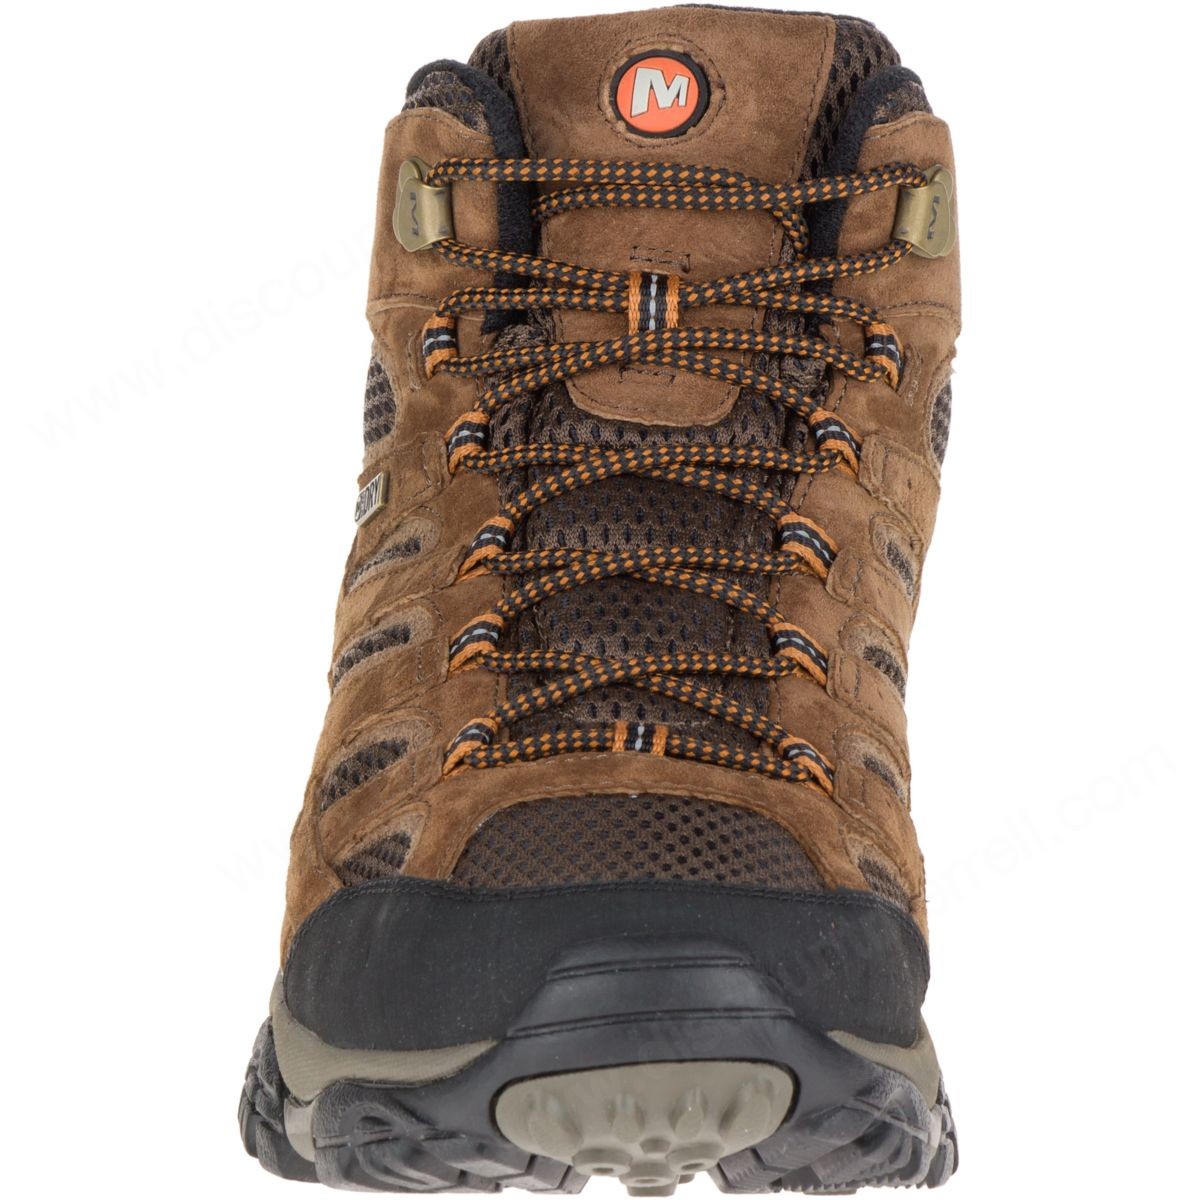 Merrell Man's Moab Mother Of All Boots™ Mid Waterproof Earth - -4